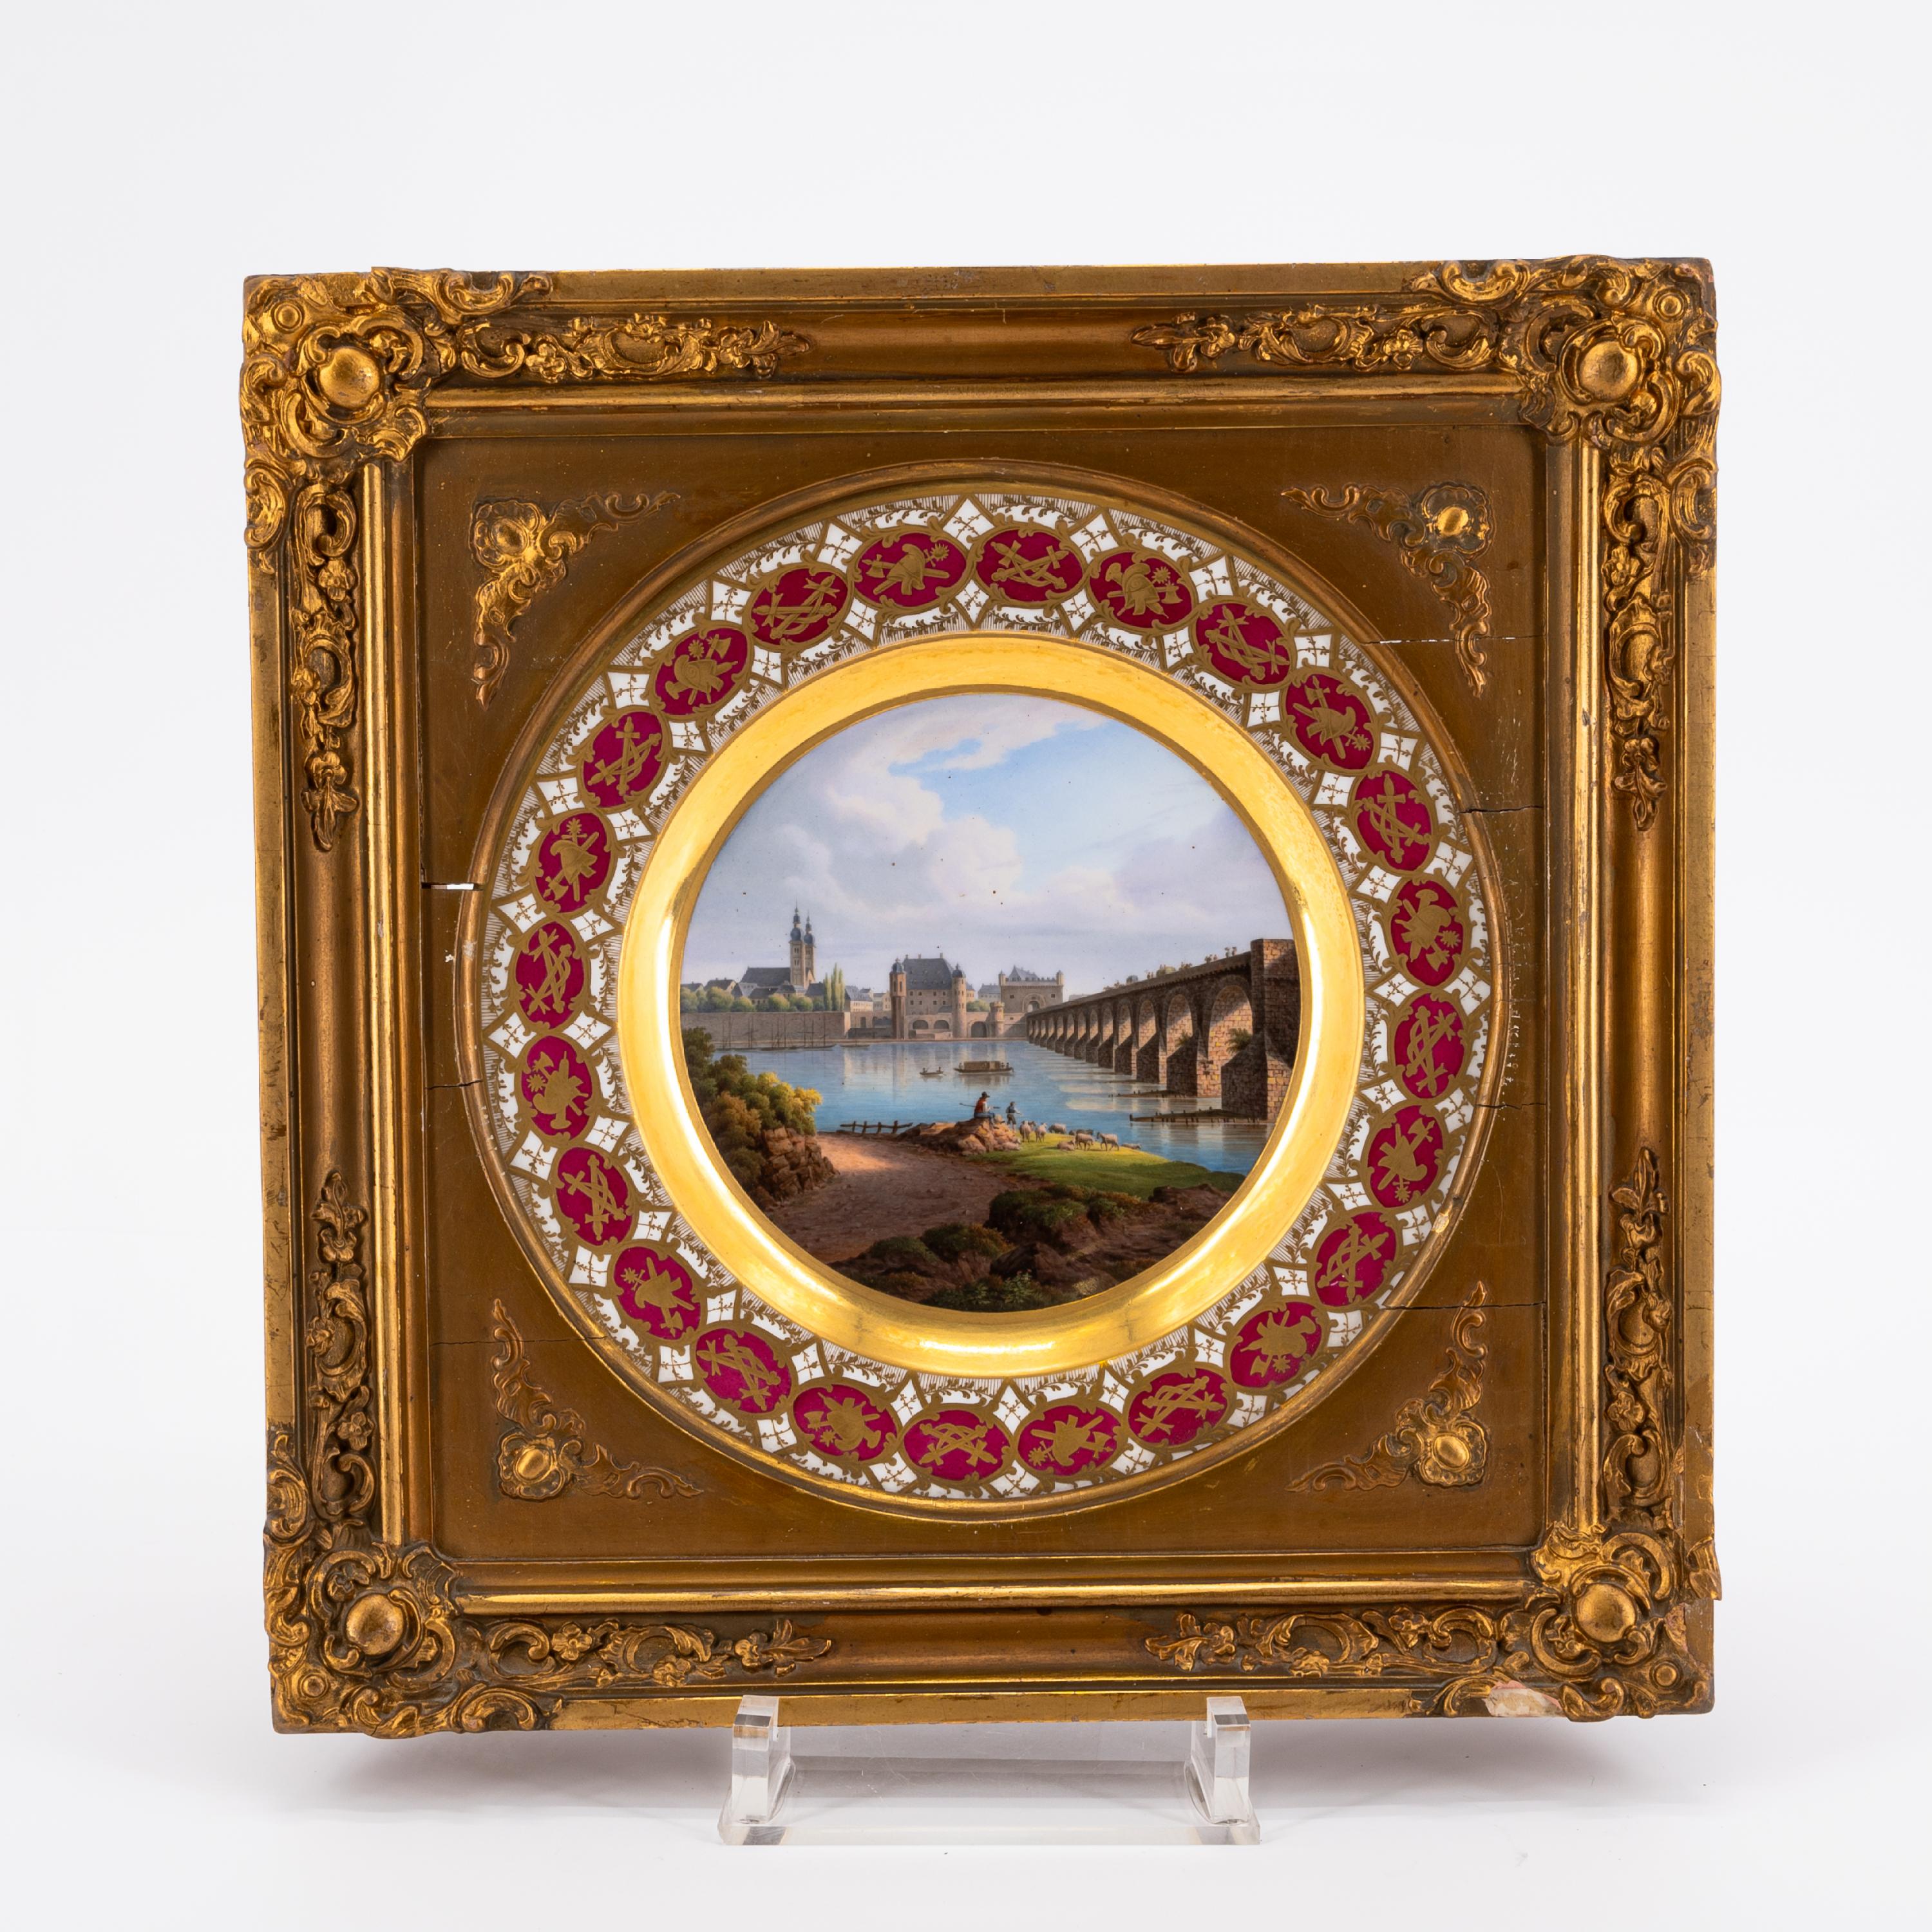 EXEPTIONAL SERIES OF TWELVE PORCELAIN PLATES WITH ROMANTIC VIEWS OF THE RHINE - Image 21 of 26